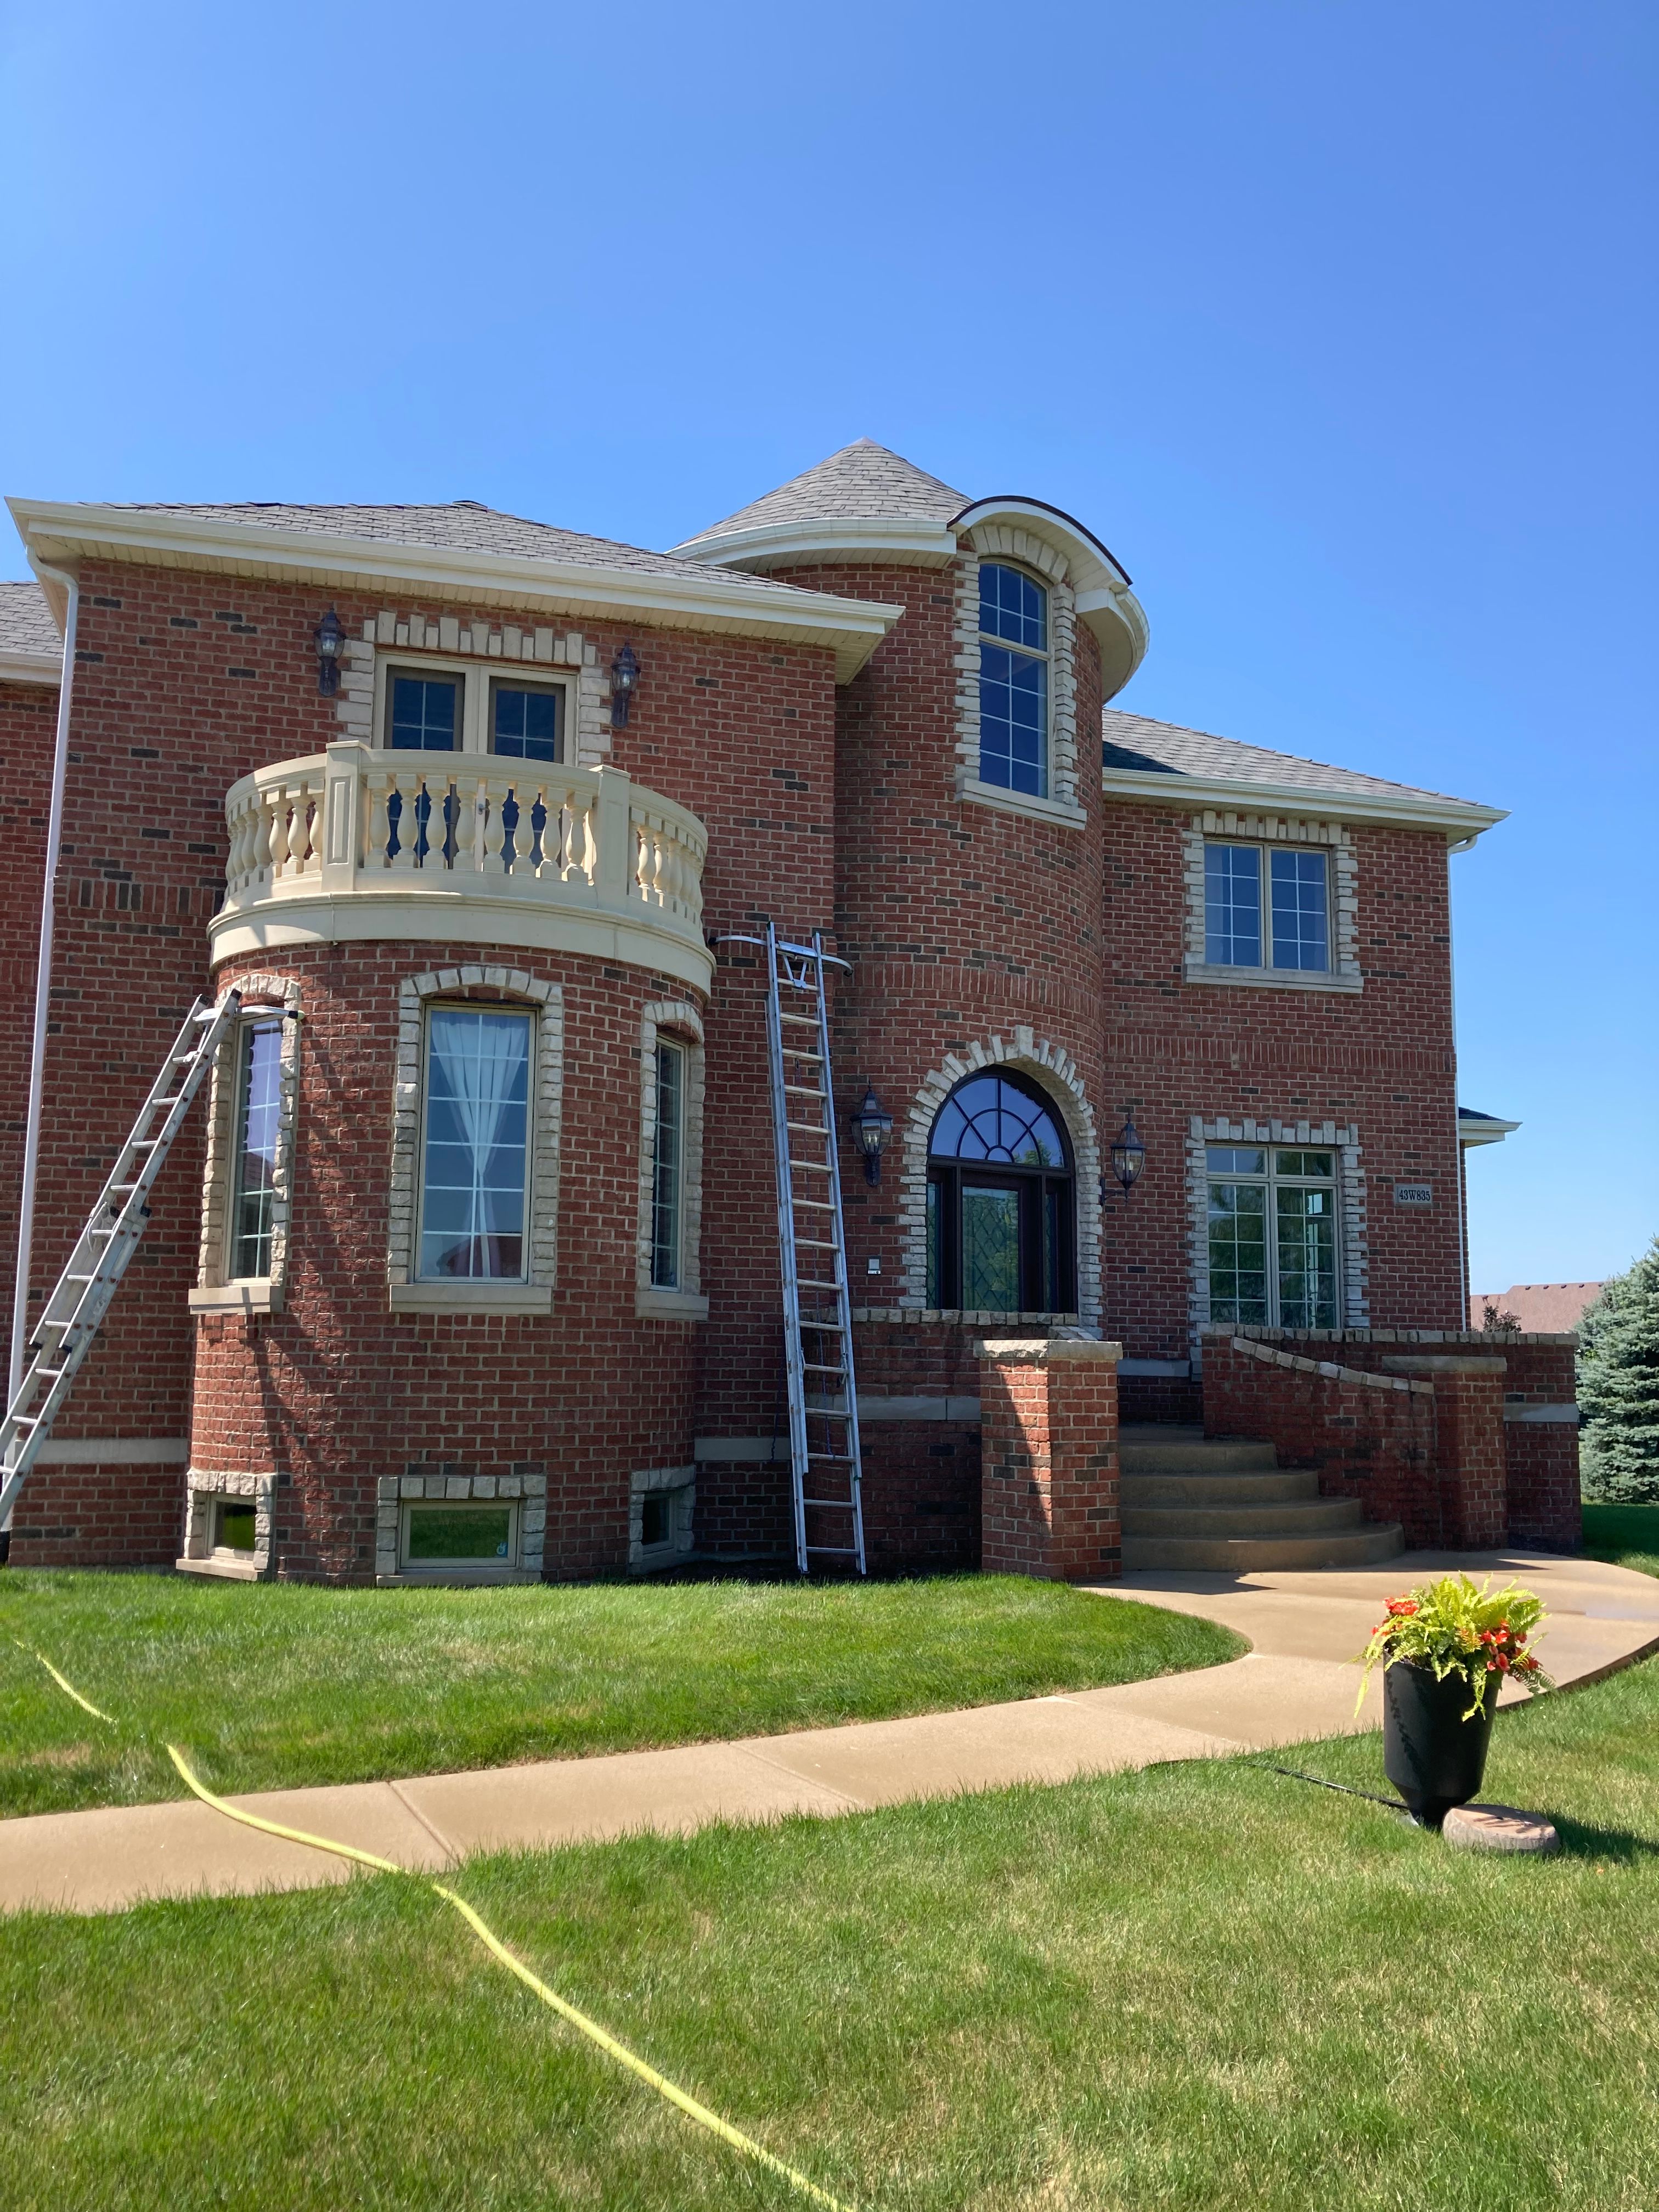 Home Wash for J&J Power Washing and Gutter Cleaning in Sycamore, IL